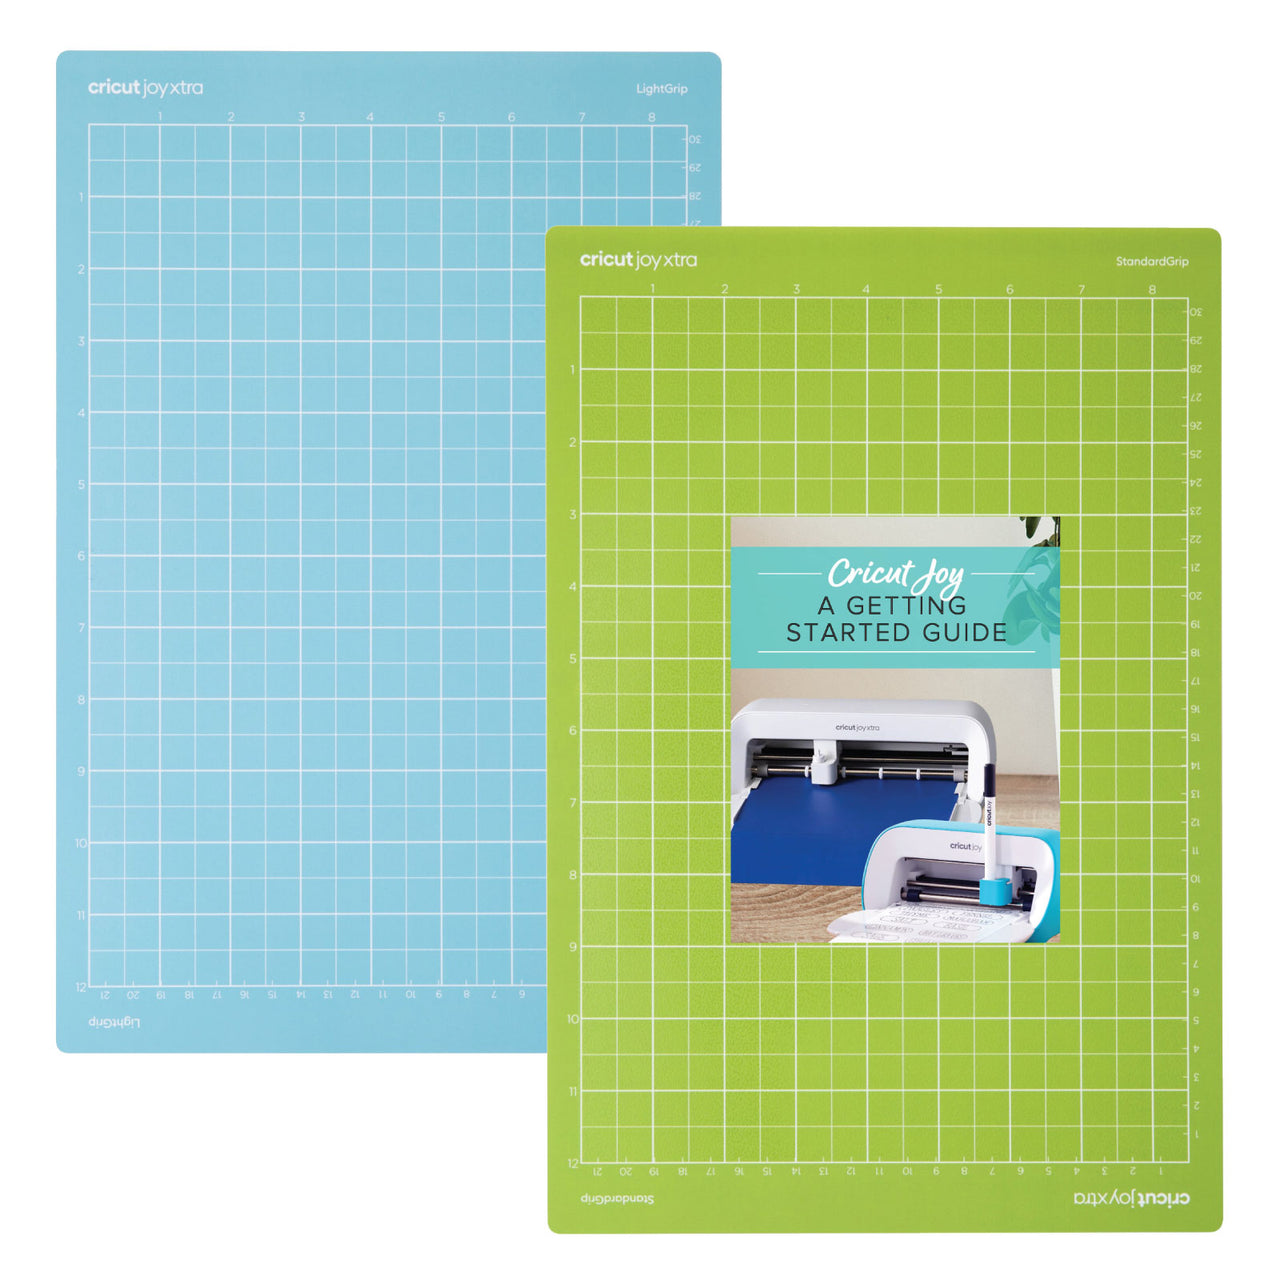 Cricut Joy Xtra Card Mat with Two Pack Holographic Insert Cards